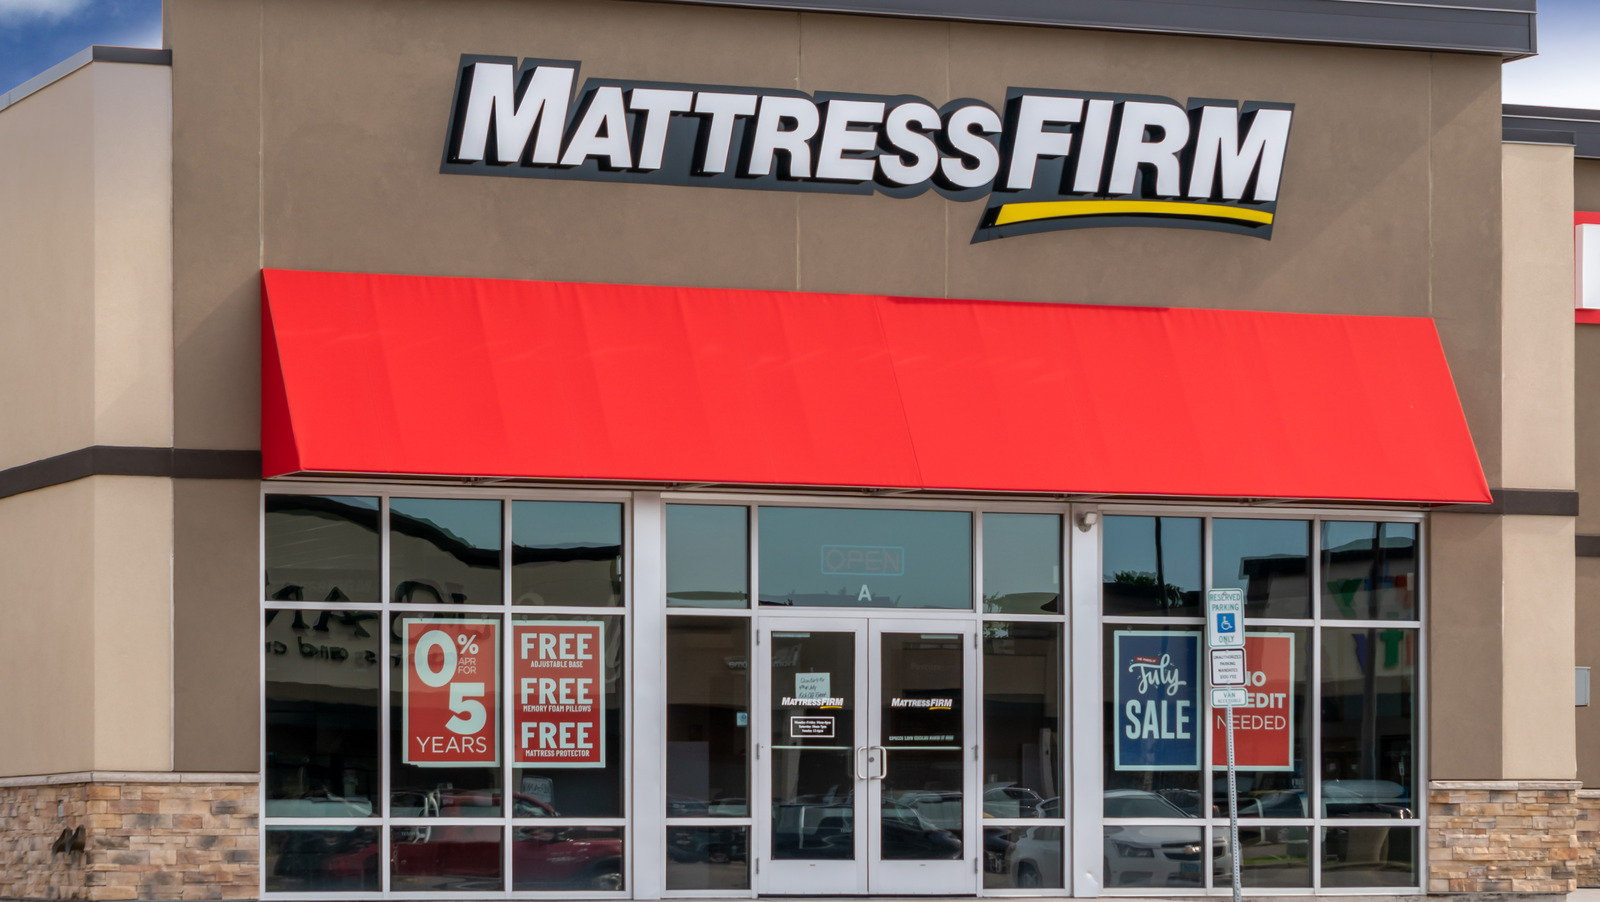 actor on mattress firm commercial